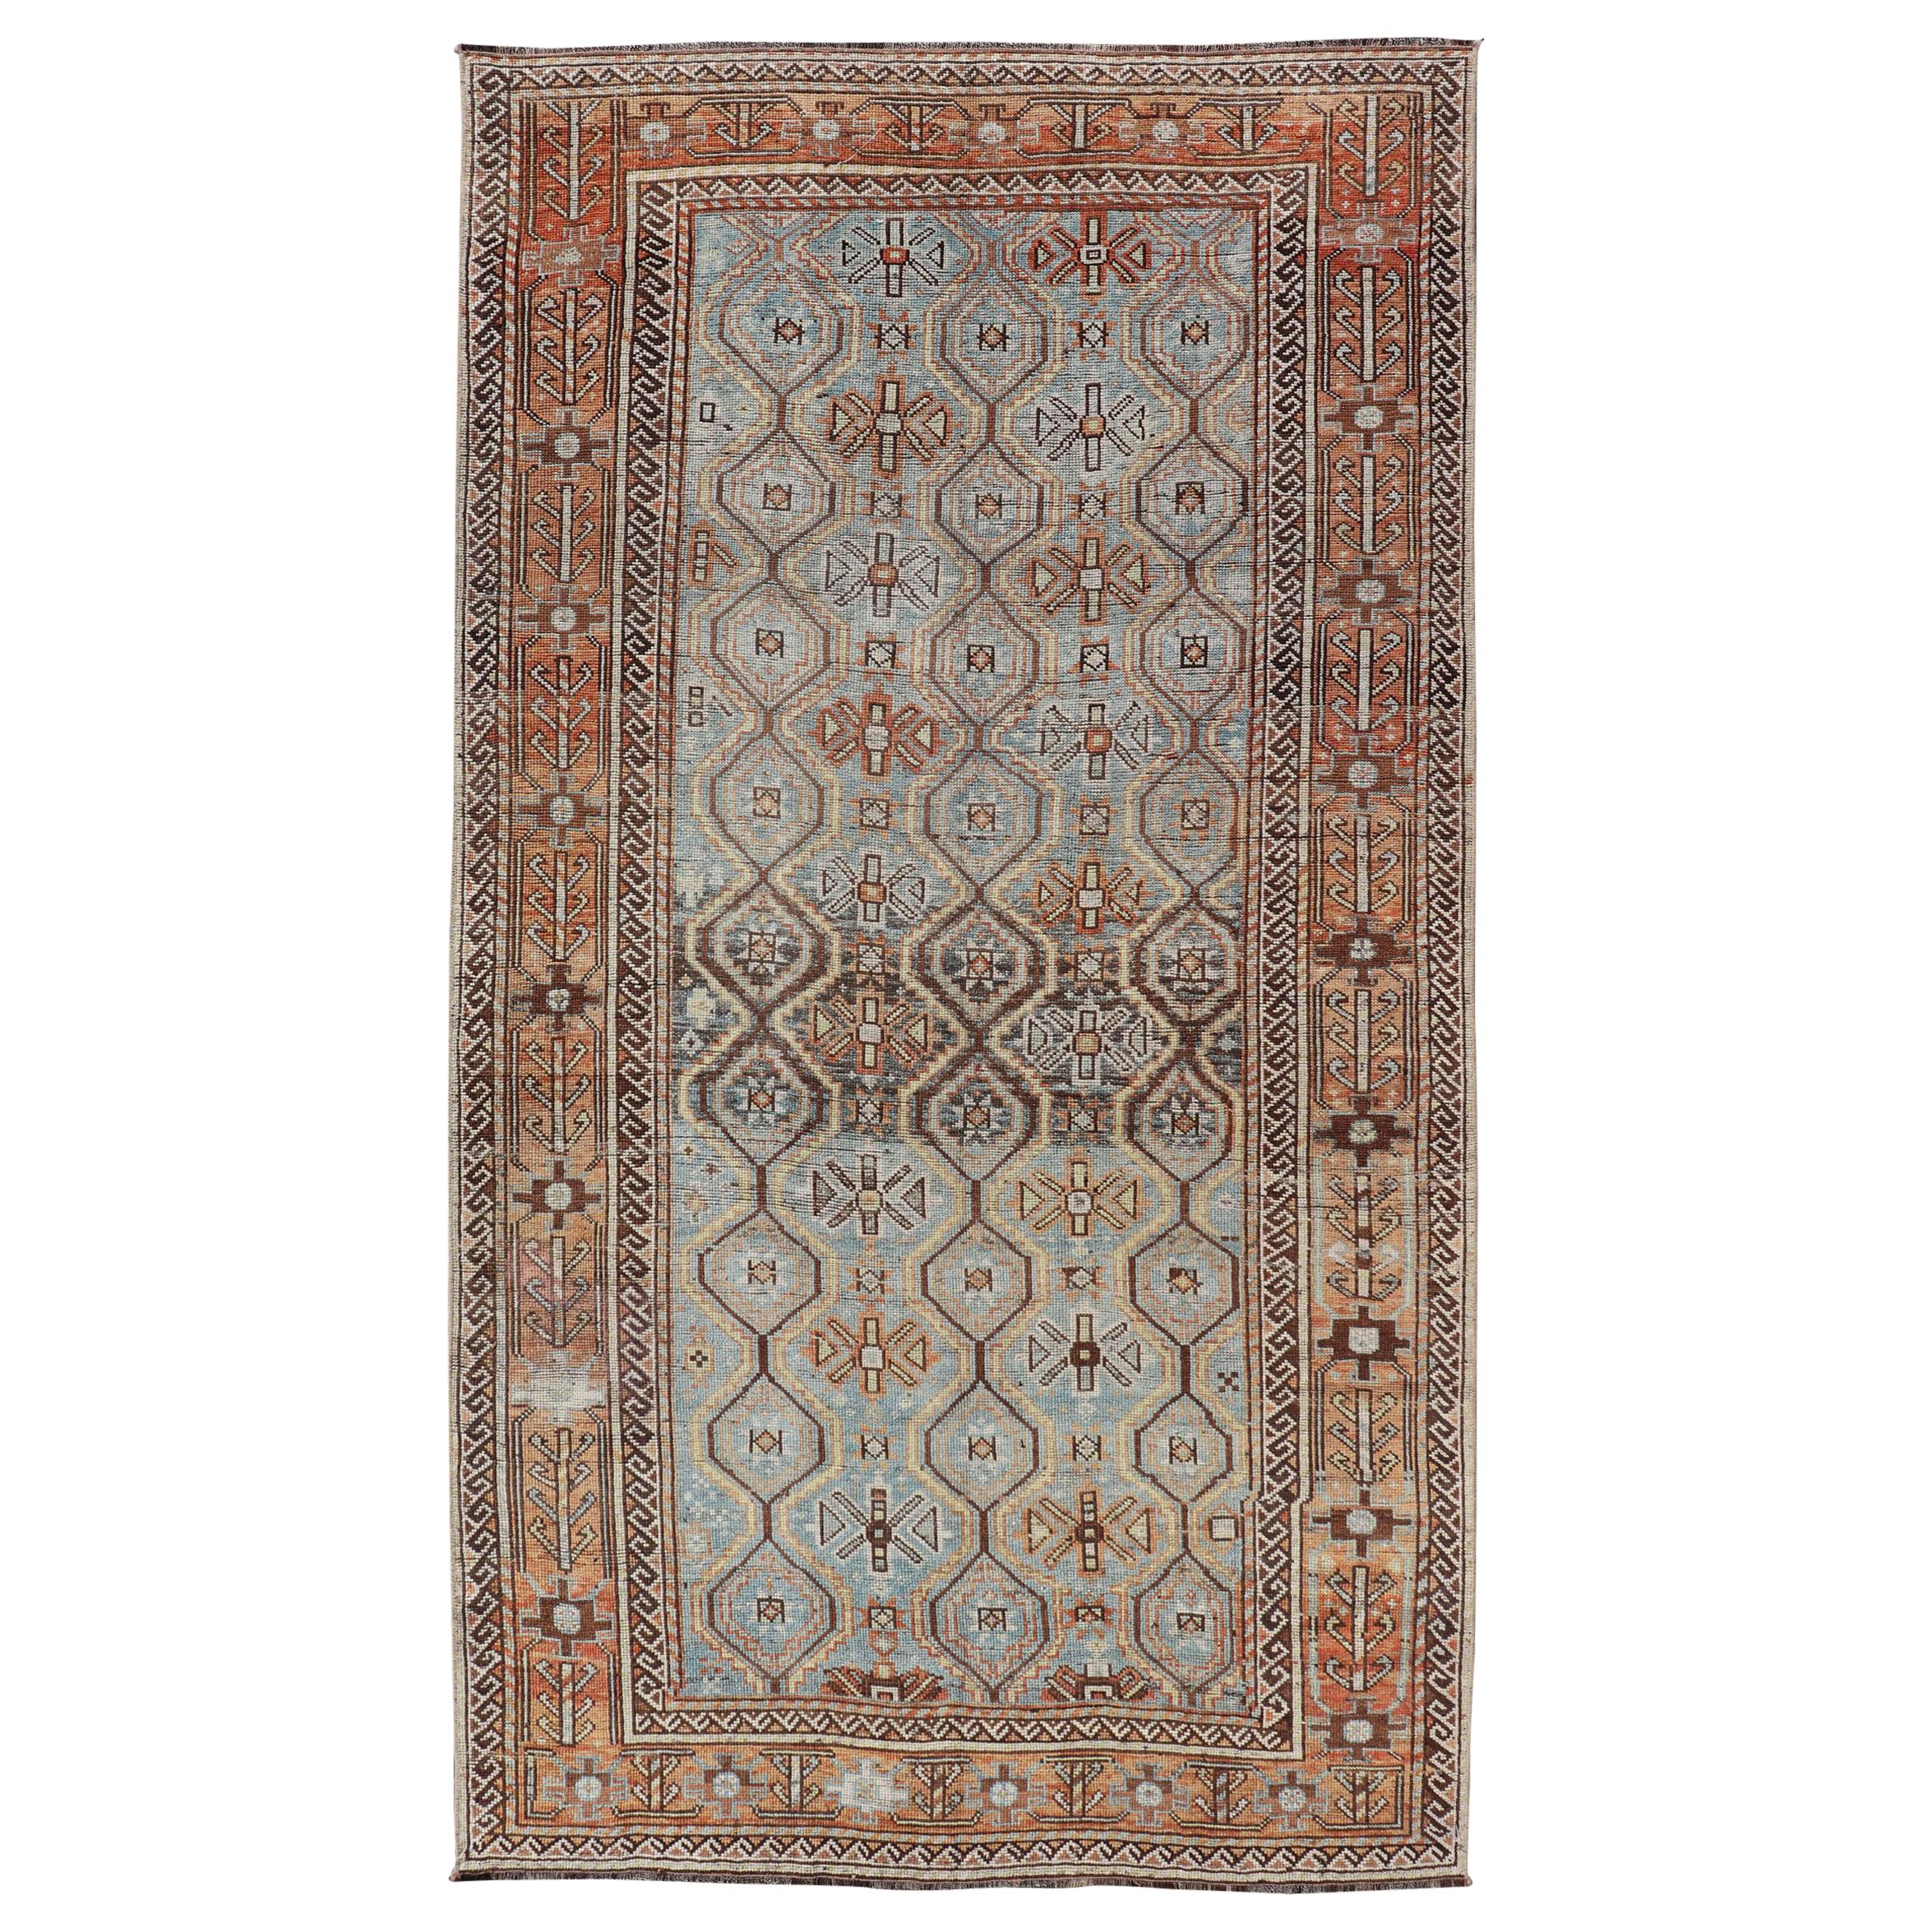 Ice Blue and Coper Color Antique Persian Kurdish Rug with All-Over Tribal